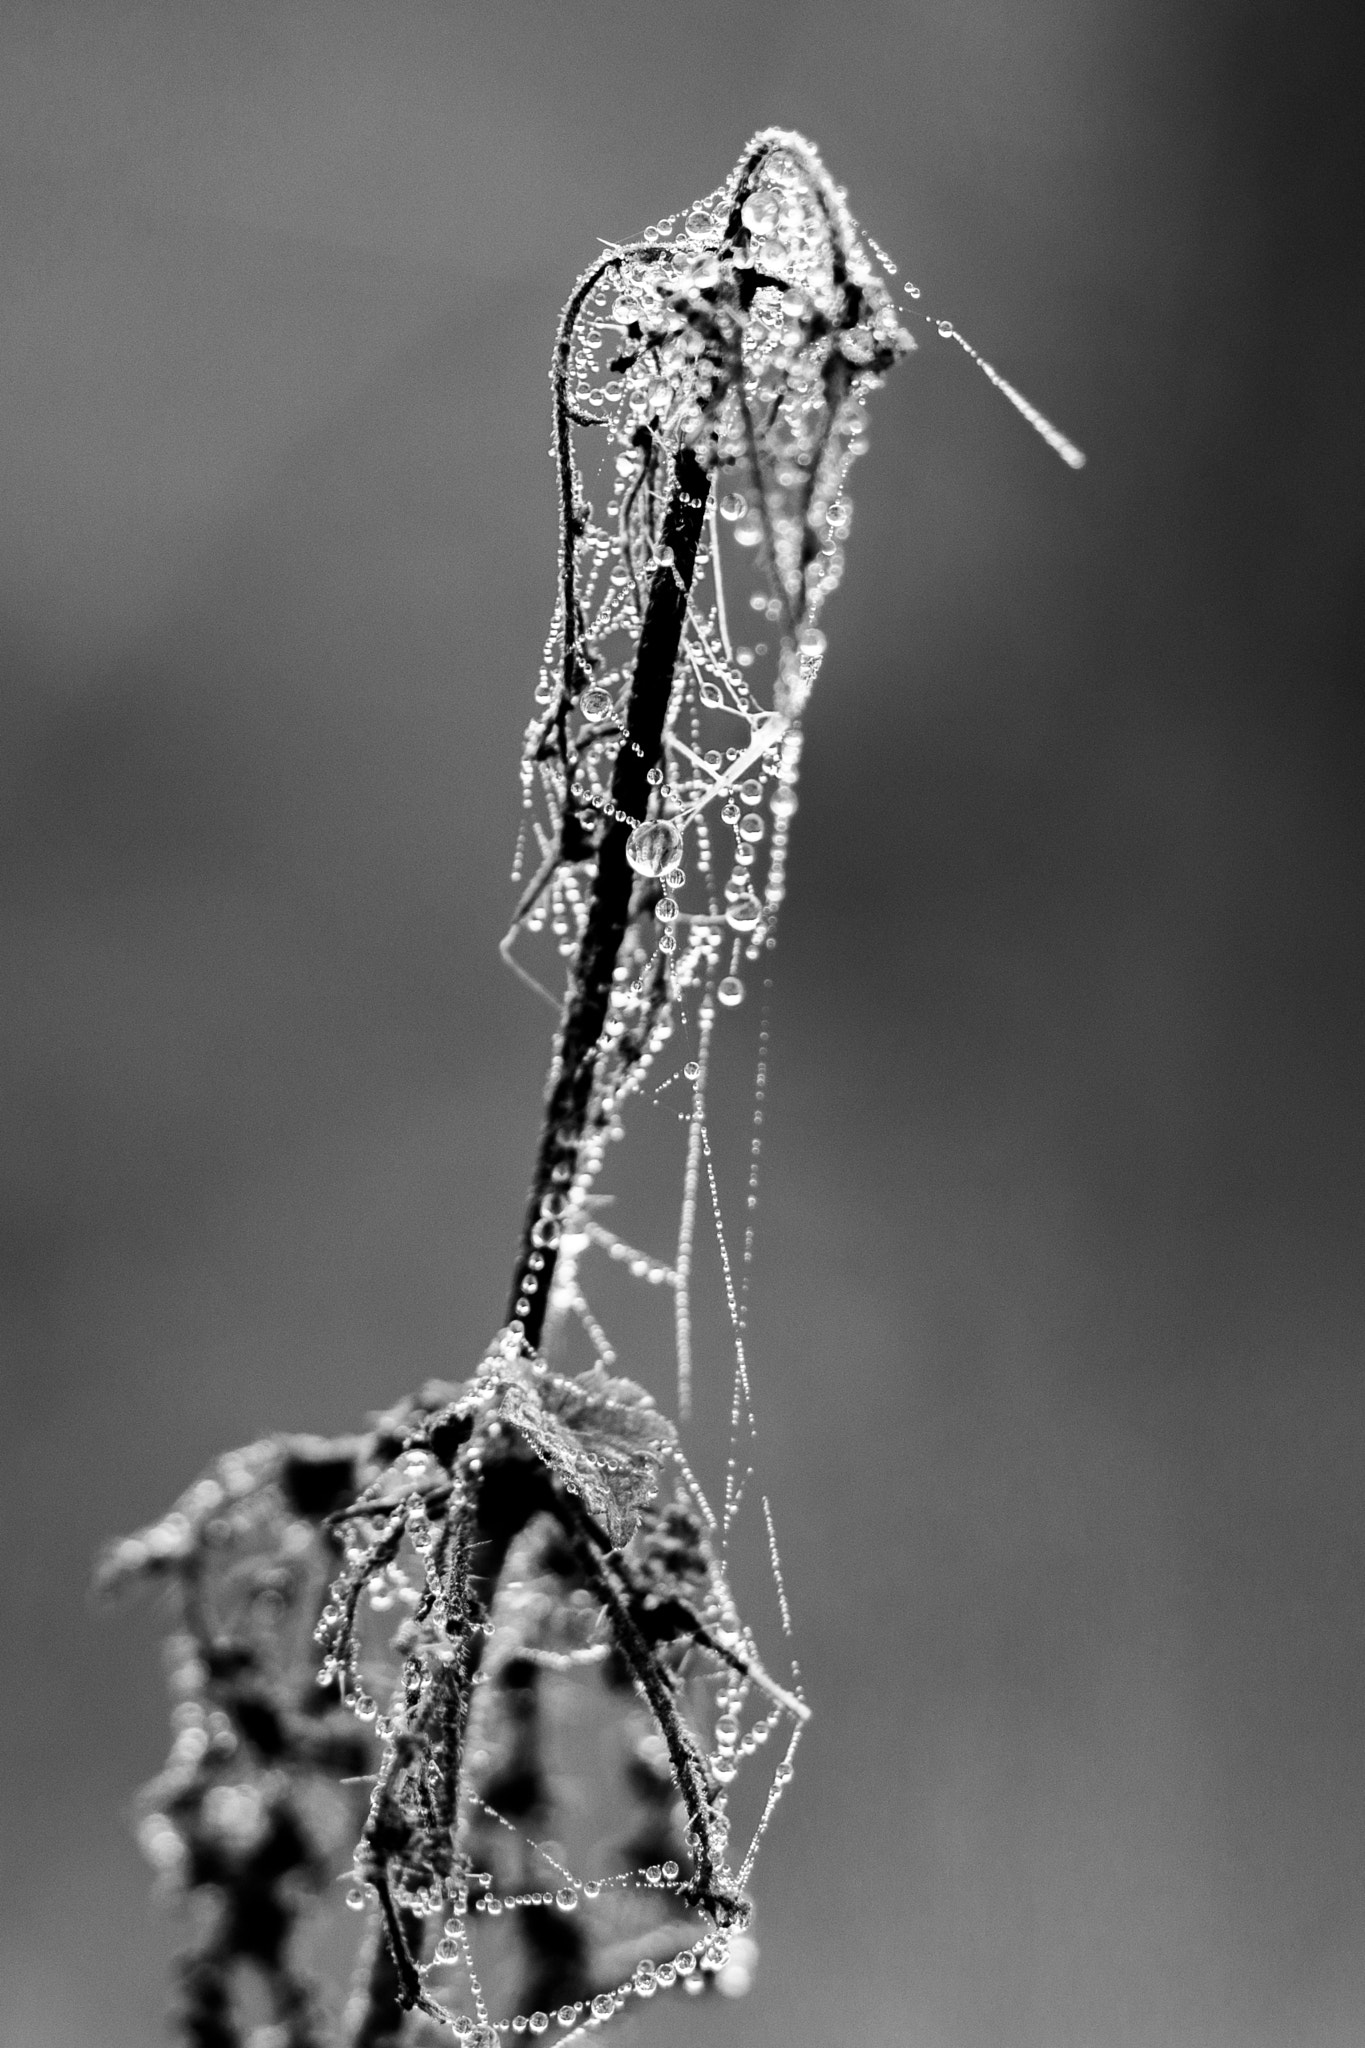 90mm F2.8 Macro G OSS sample photo. Caught in a web. photography